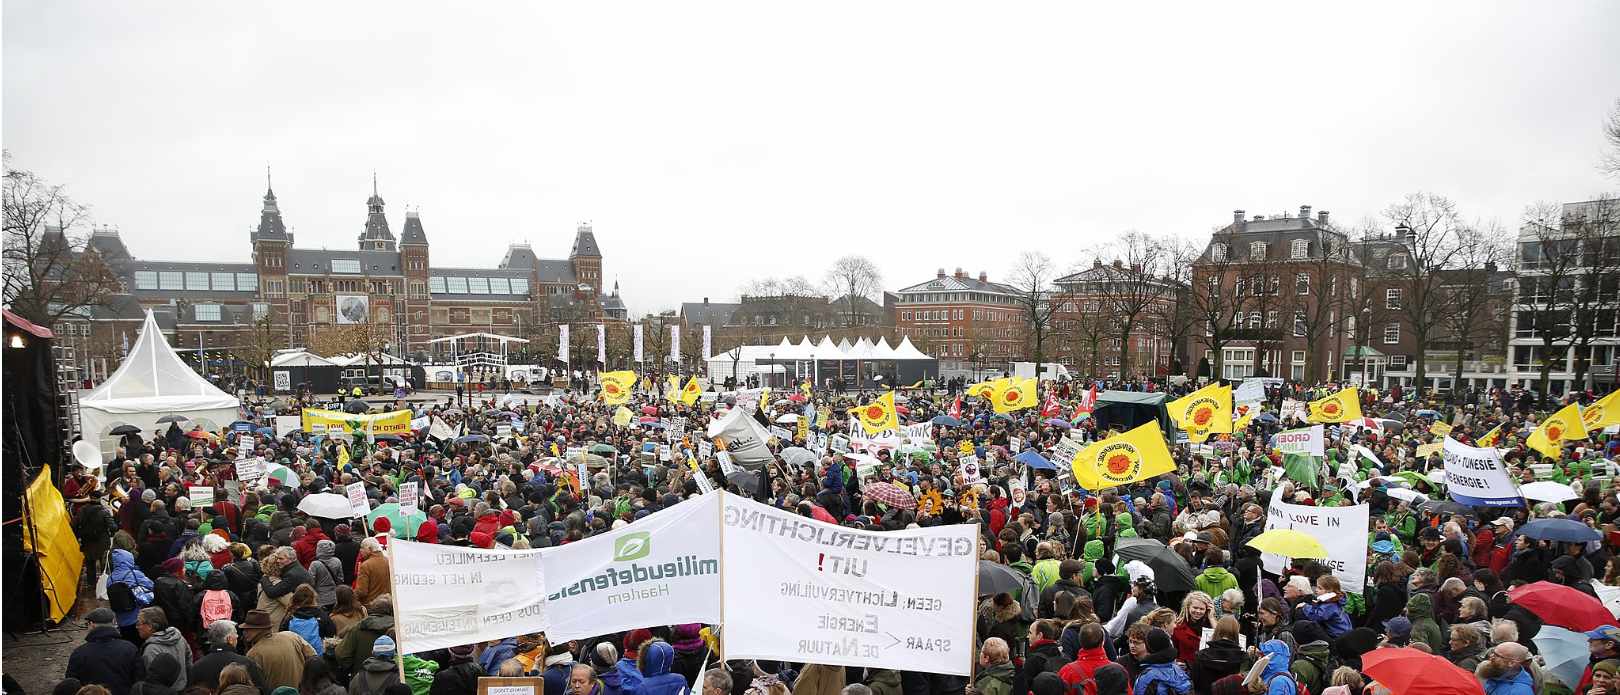 Demonstrations against climate change in Amsterdam in 2015